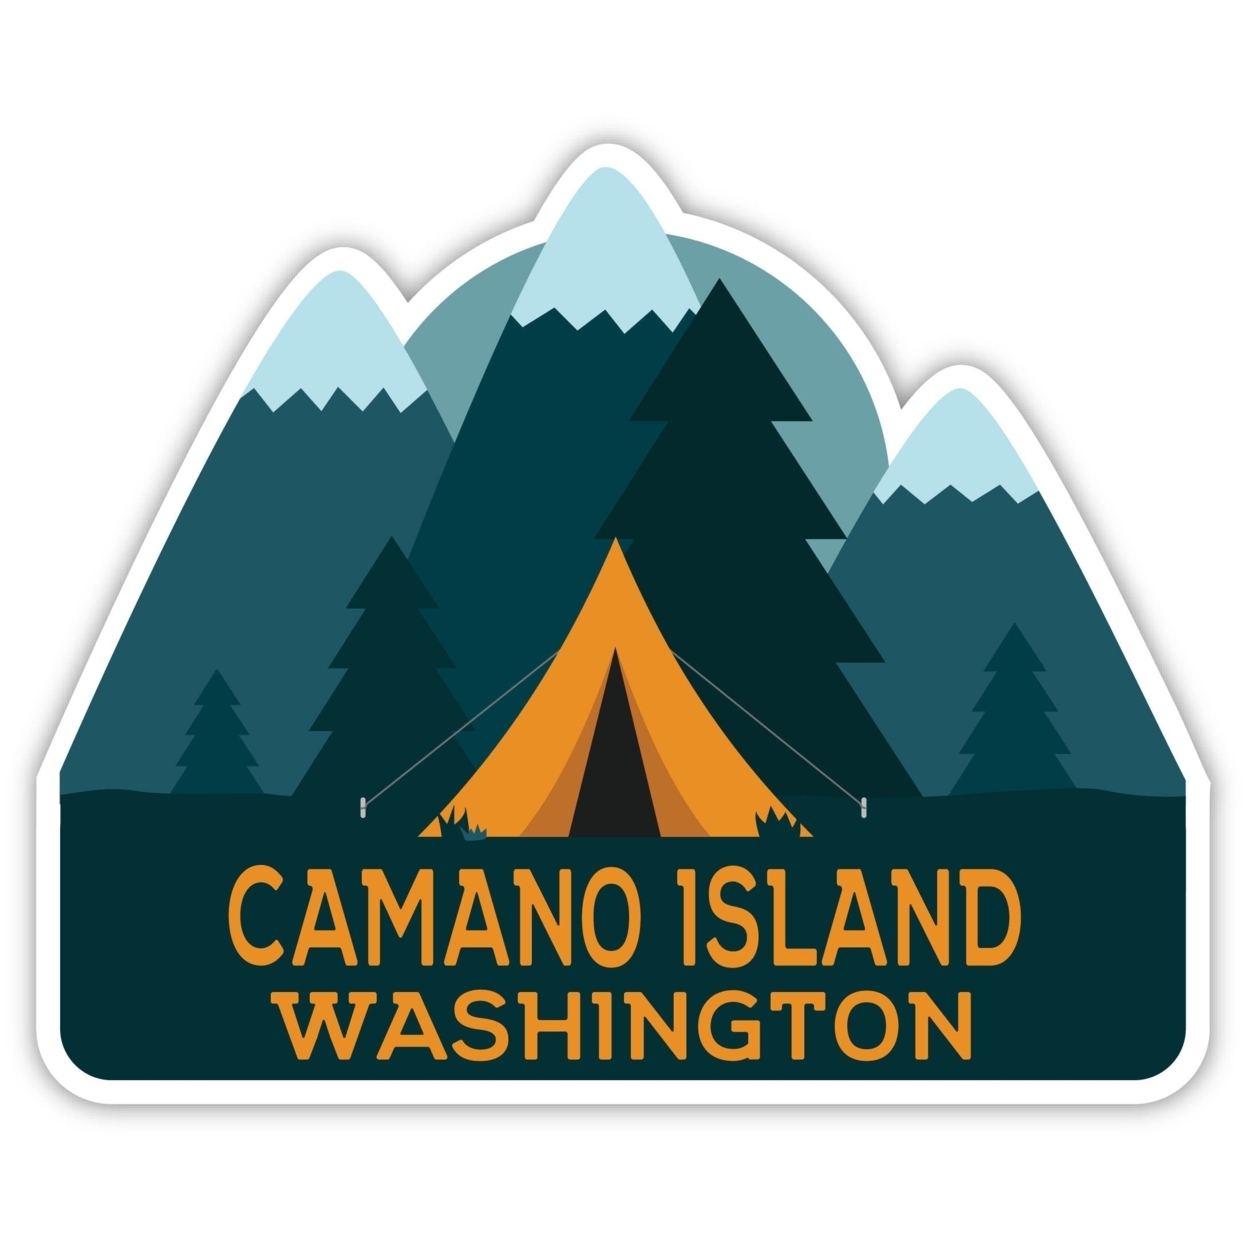 Camano Island Washington Souvenir Decorative Stickers (Choose Theme And Size) - 4-Pack, 4-Inch, Great Outdoors